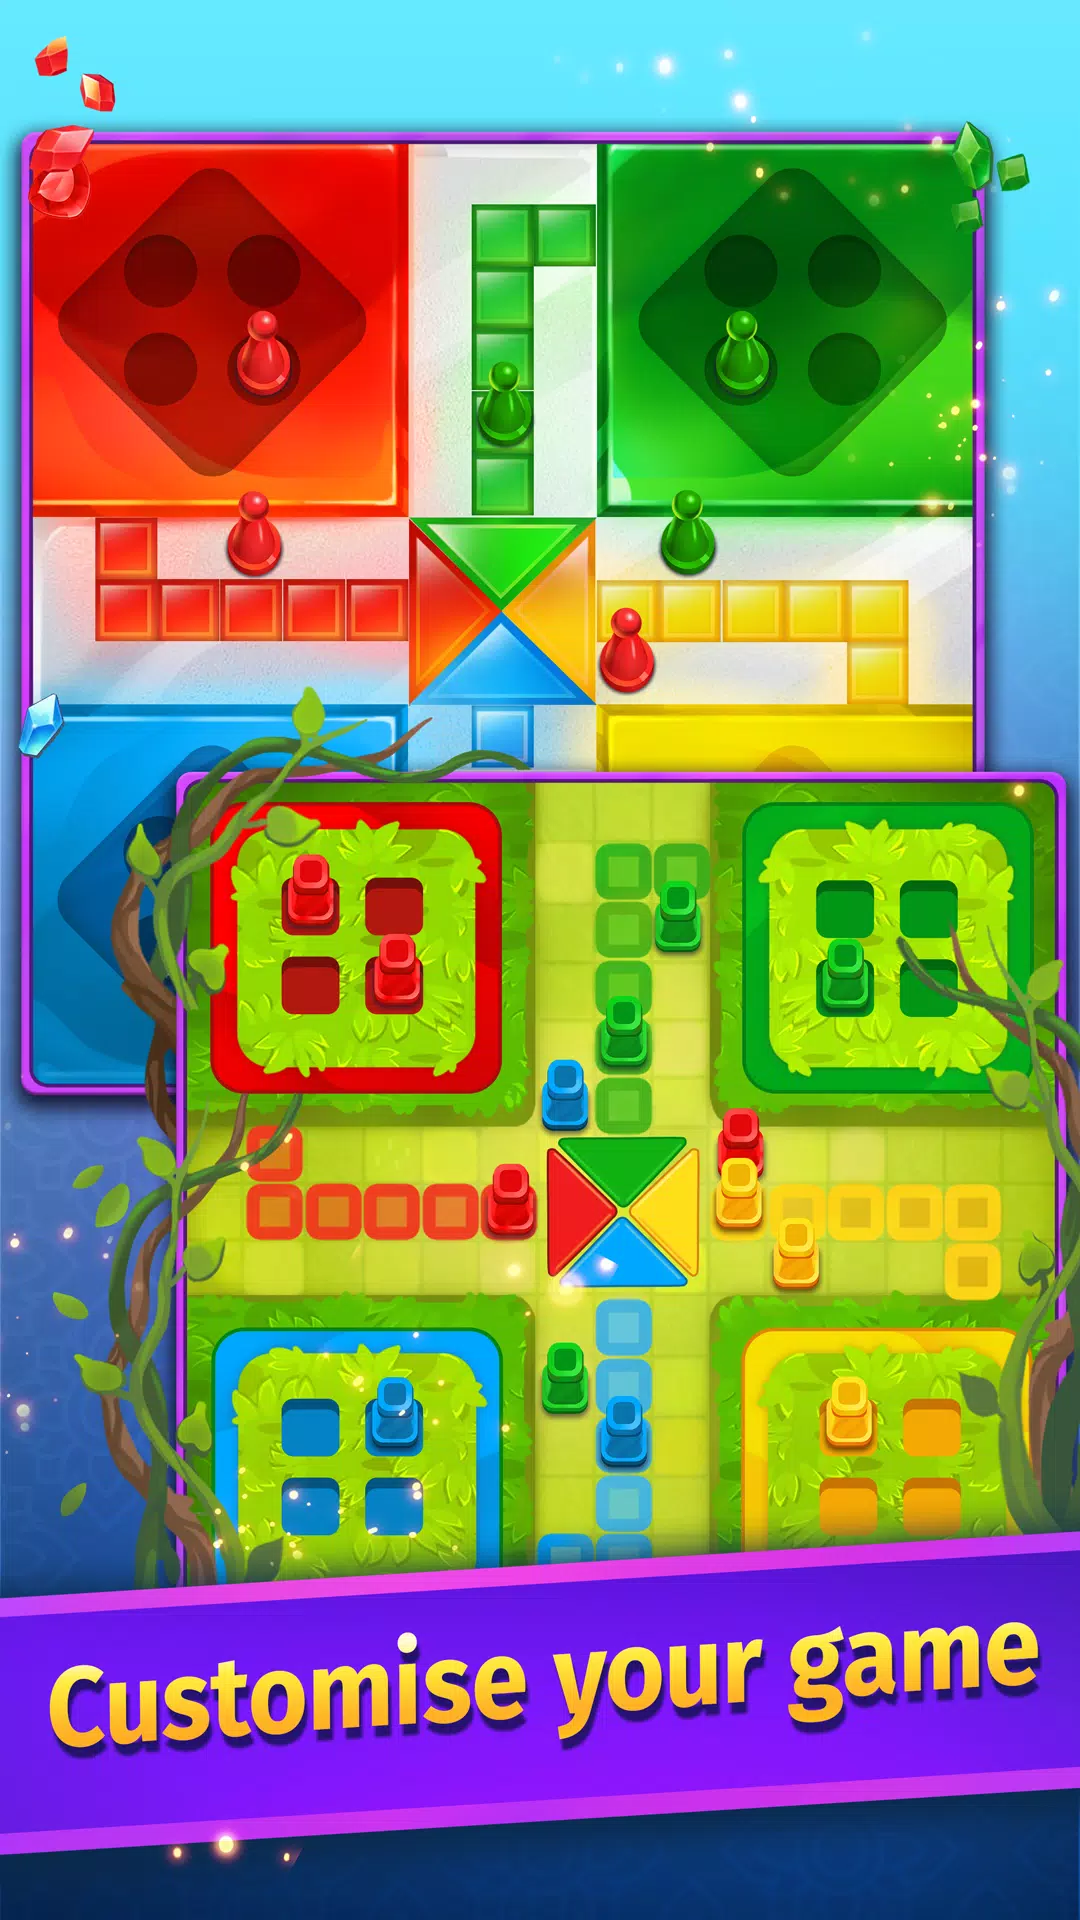 Ludo Time-Free Online Ludo Game With Voice Chat android iOS apk